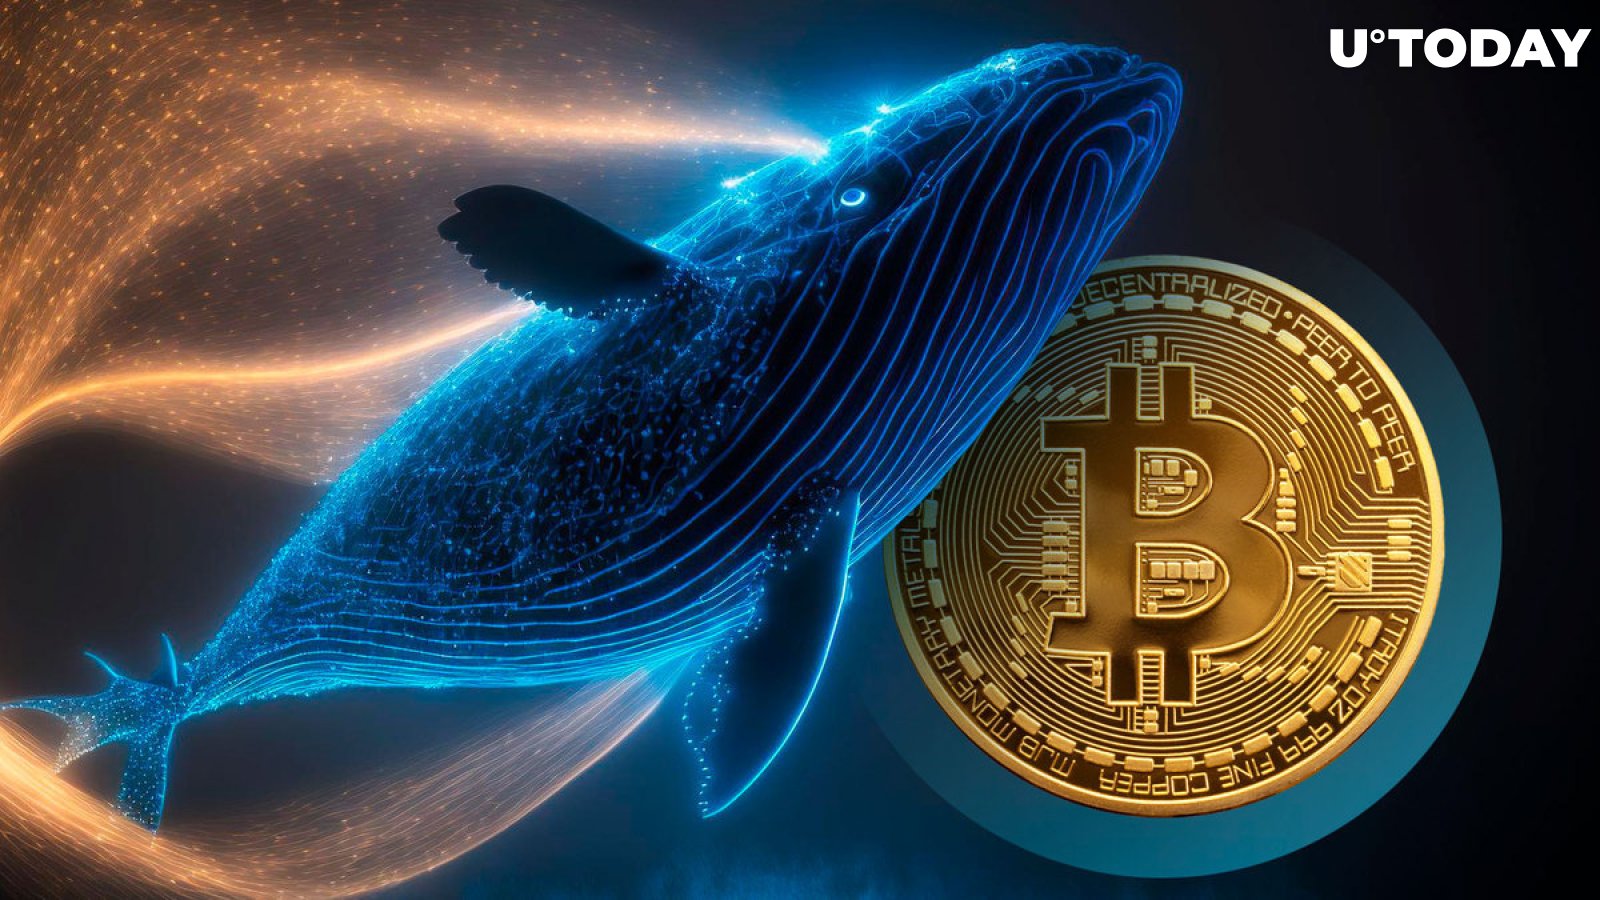 Intrigue when a new Bitcoin whale is born with an exchange of 2000 BTC: Details